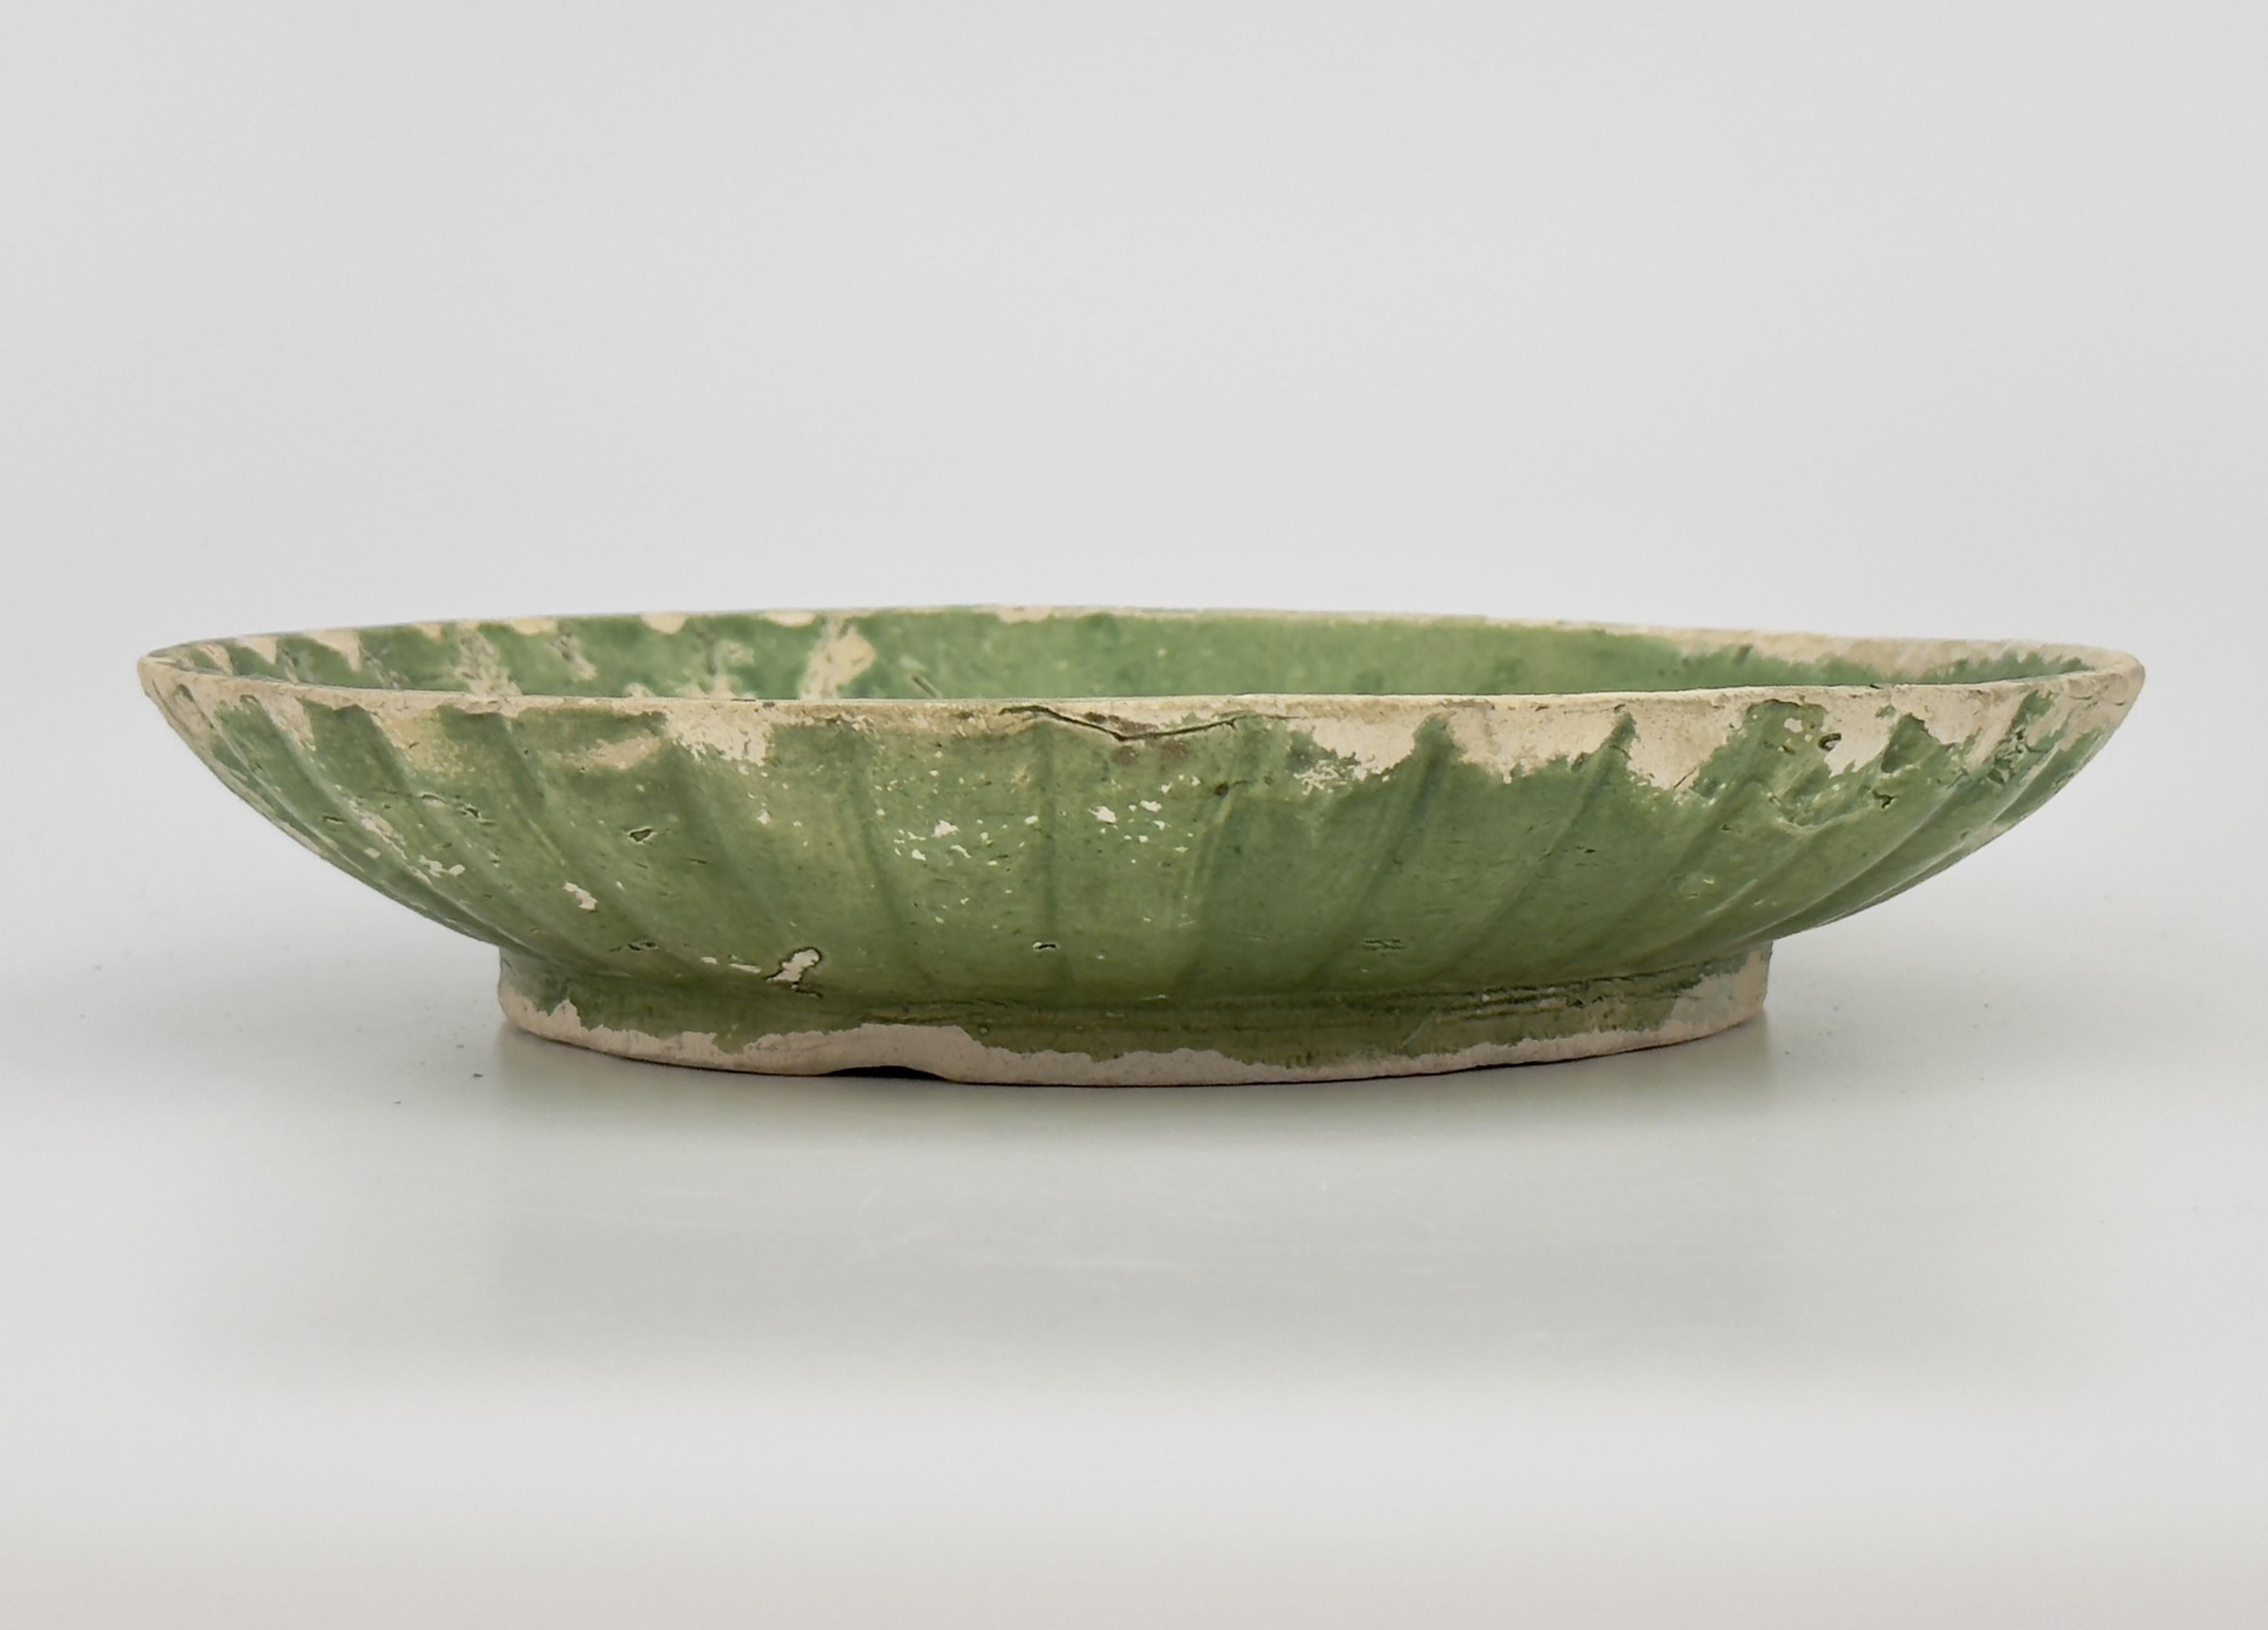 It is the rare earthenware among those excavated from the Ca Mau Ship, and it is a green-glaze work that is especially unique. Although it is in very worn condition, it is a valuable piece for its rarity and history. Painted with green glaze against